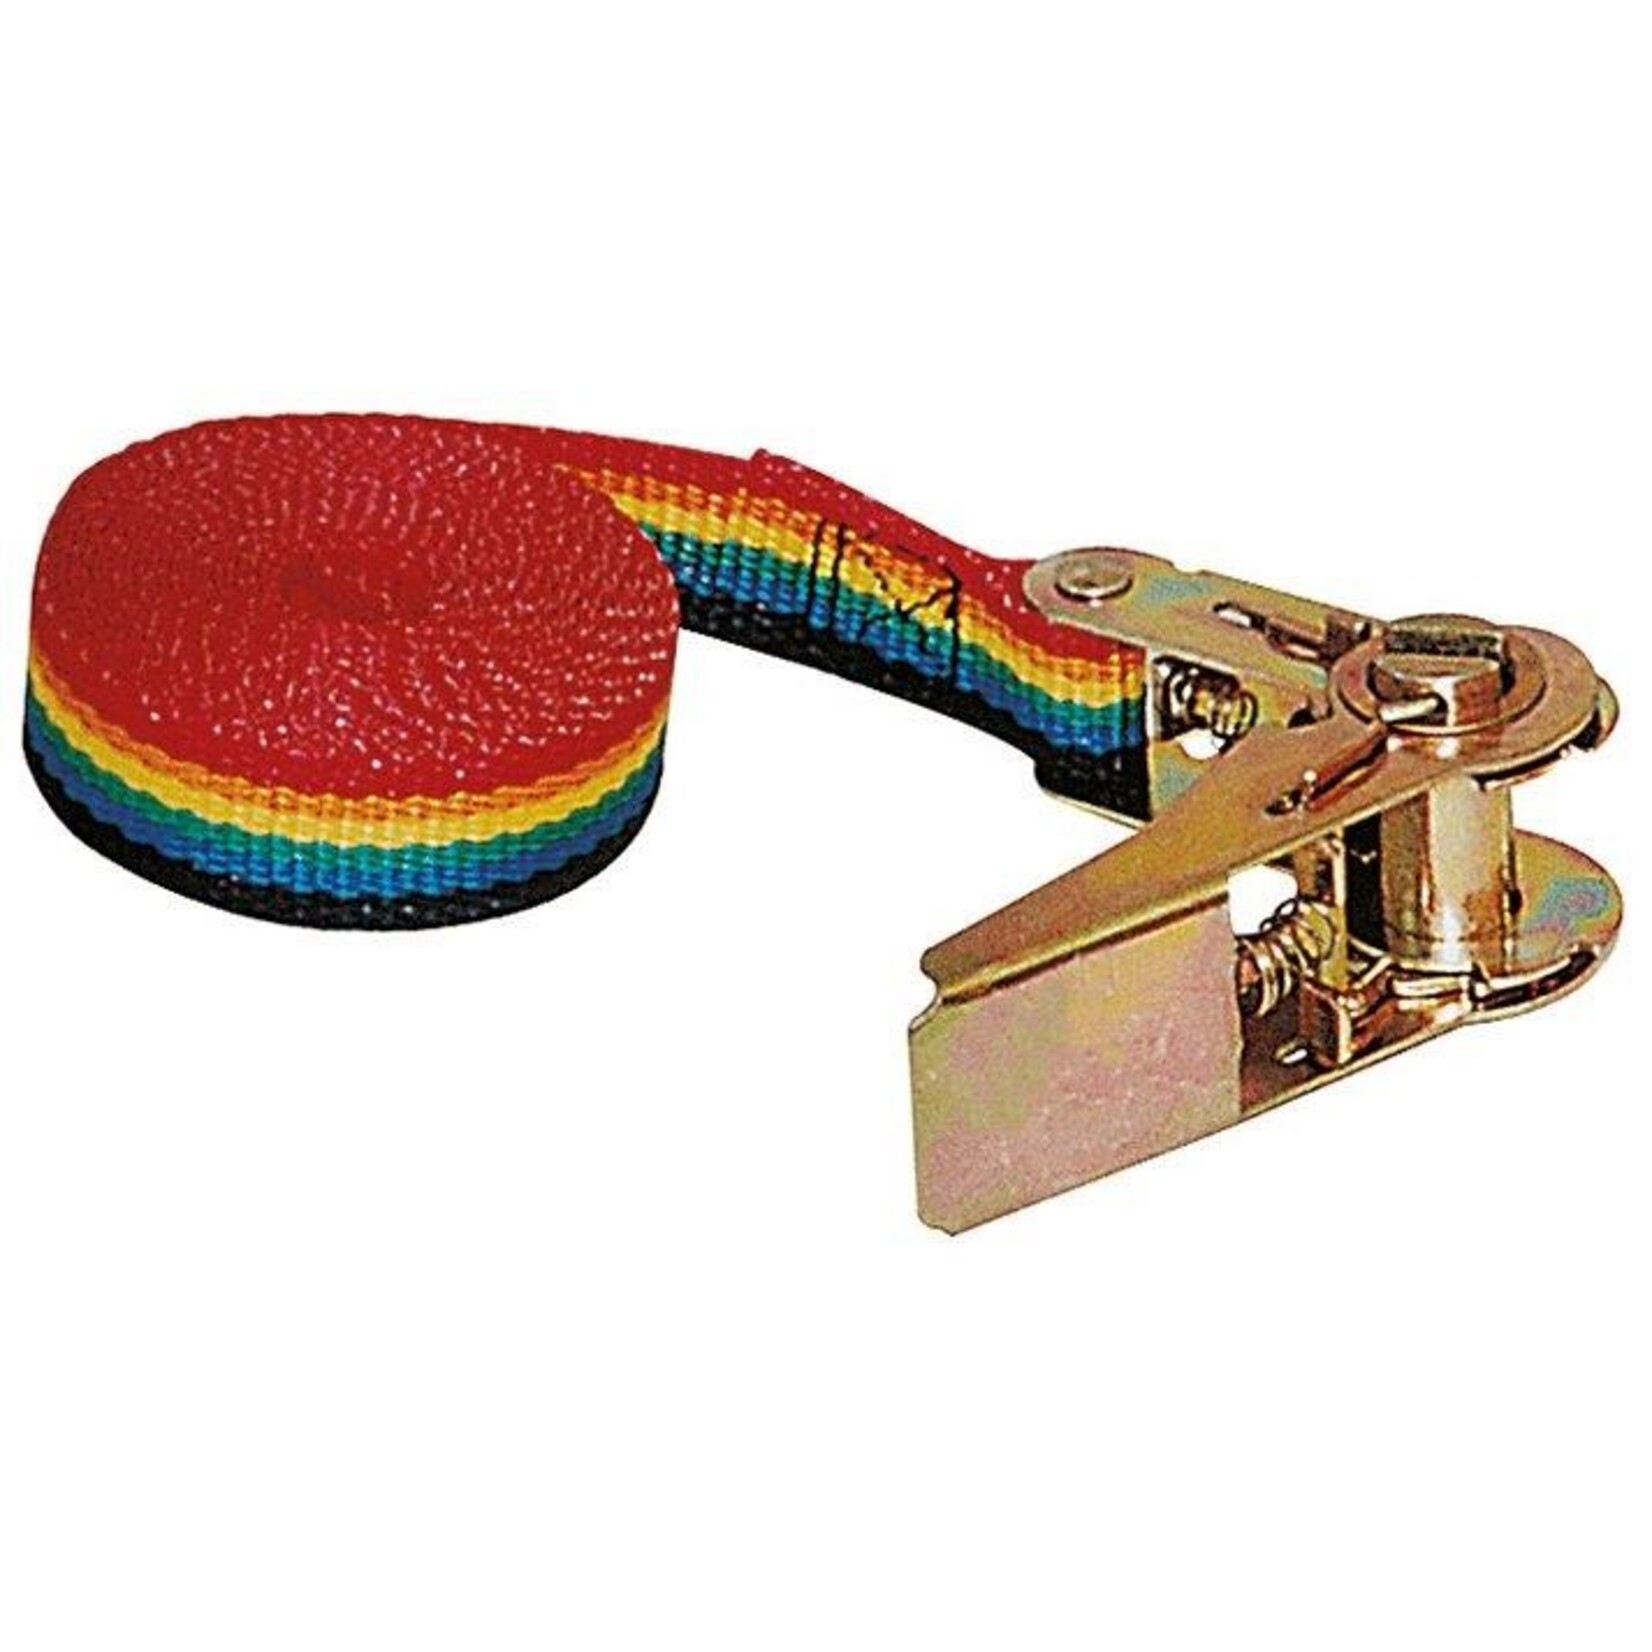 Plastimo Strap with buckle catch 3.5 m